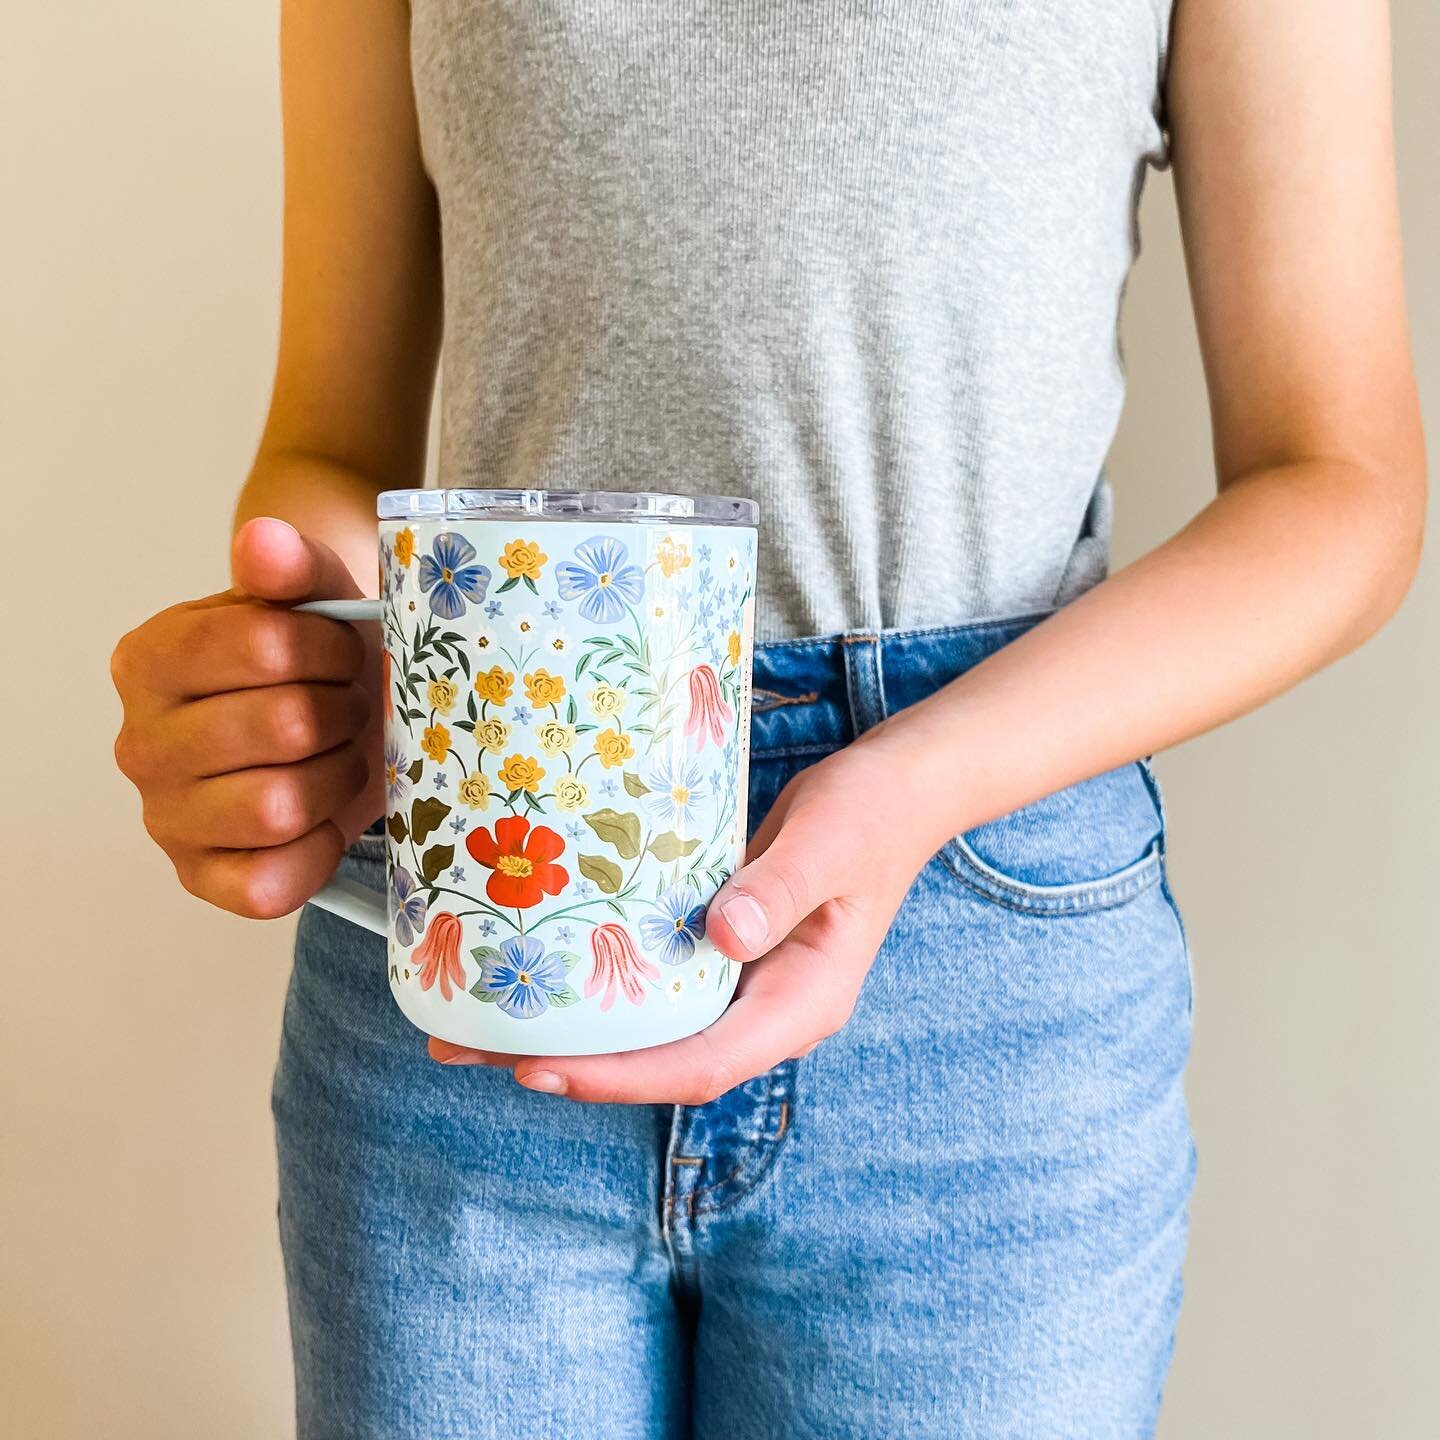 A great gift for mom! It keeps drinks warm for up to 3 hours, holds 16 oz, has a non-slip bottom, and it&rsquo;s BEAUTIFUL (just like mom)!!

#riflepaperco #corckcicle #mothersday #mothersdaygift #mug #insulatedtumbler #drinks #coffee #shopsmall #sho